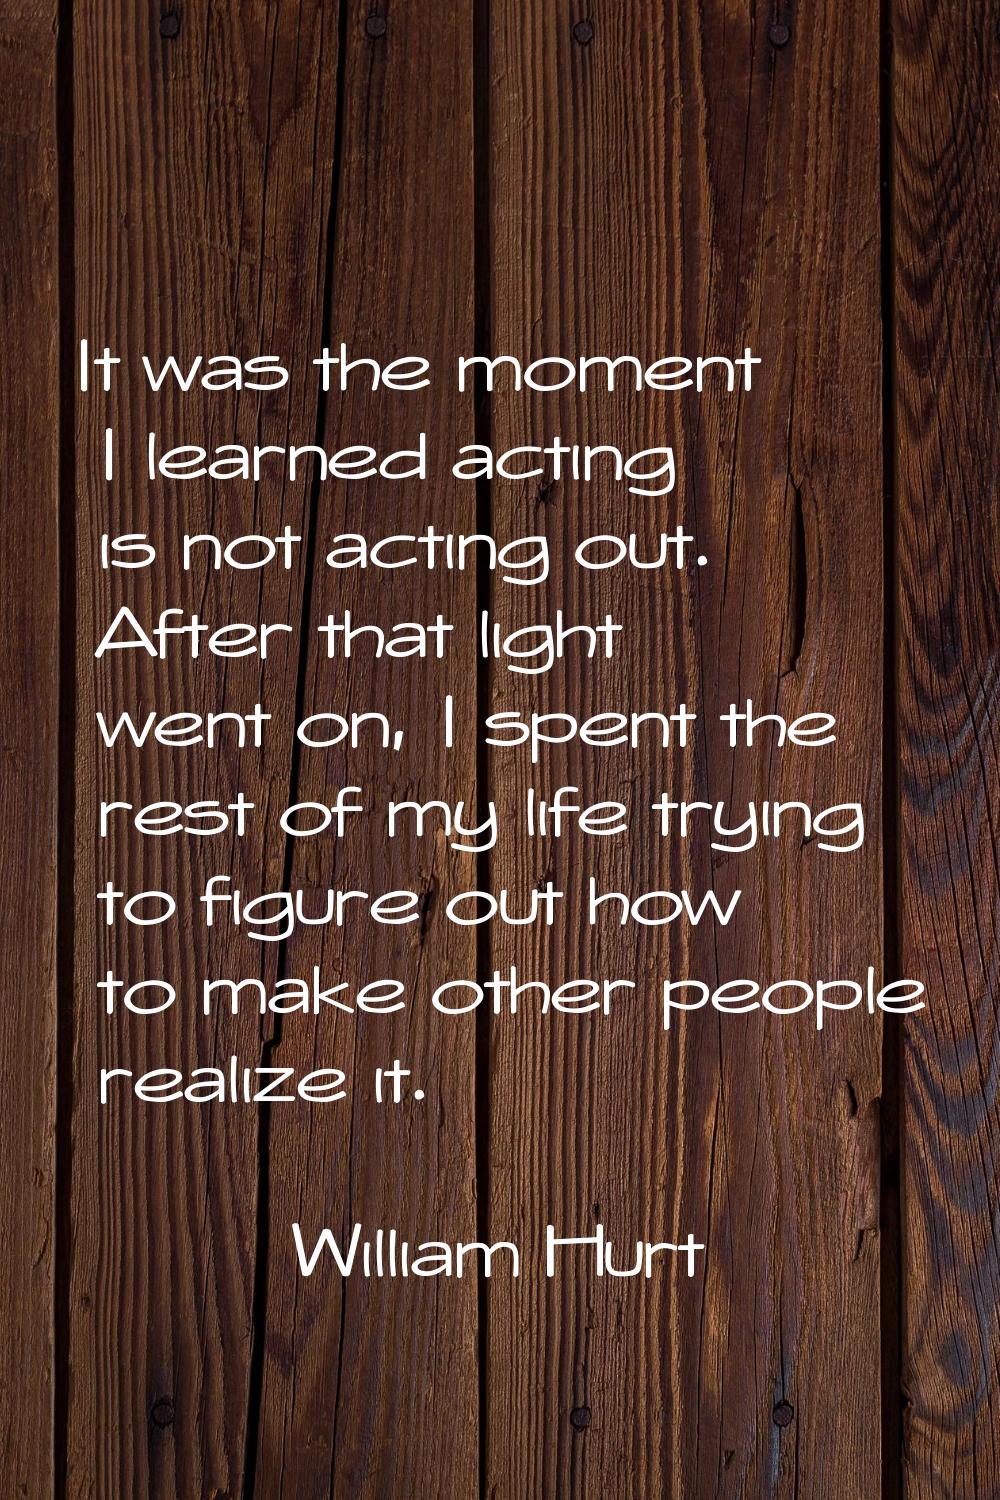 It was the moment I learned acting is not acting out. After that light went on, I spent the rest of